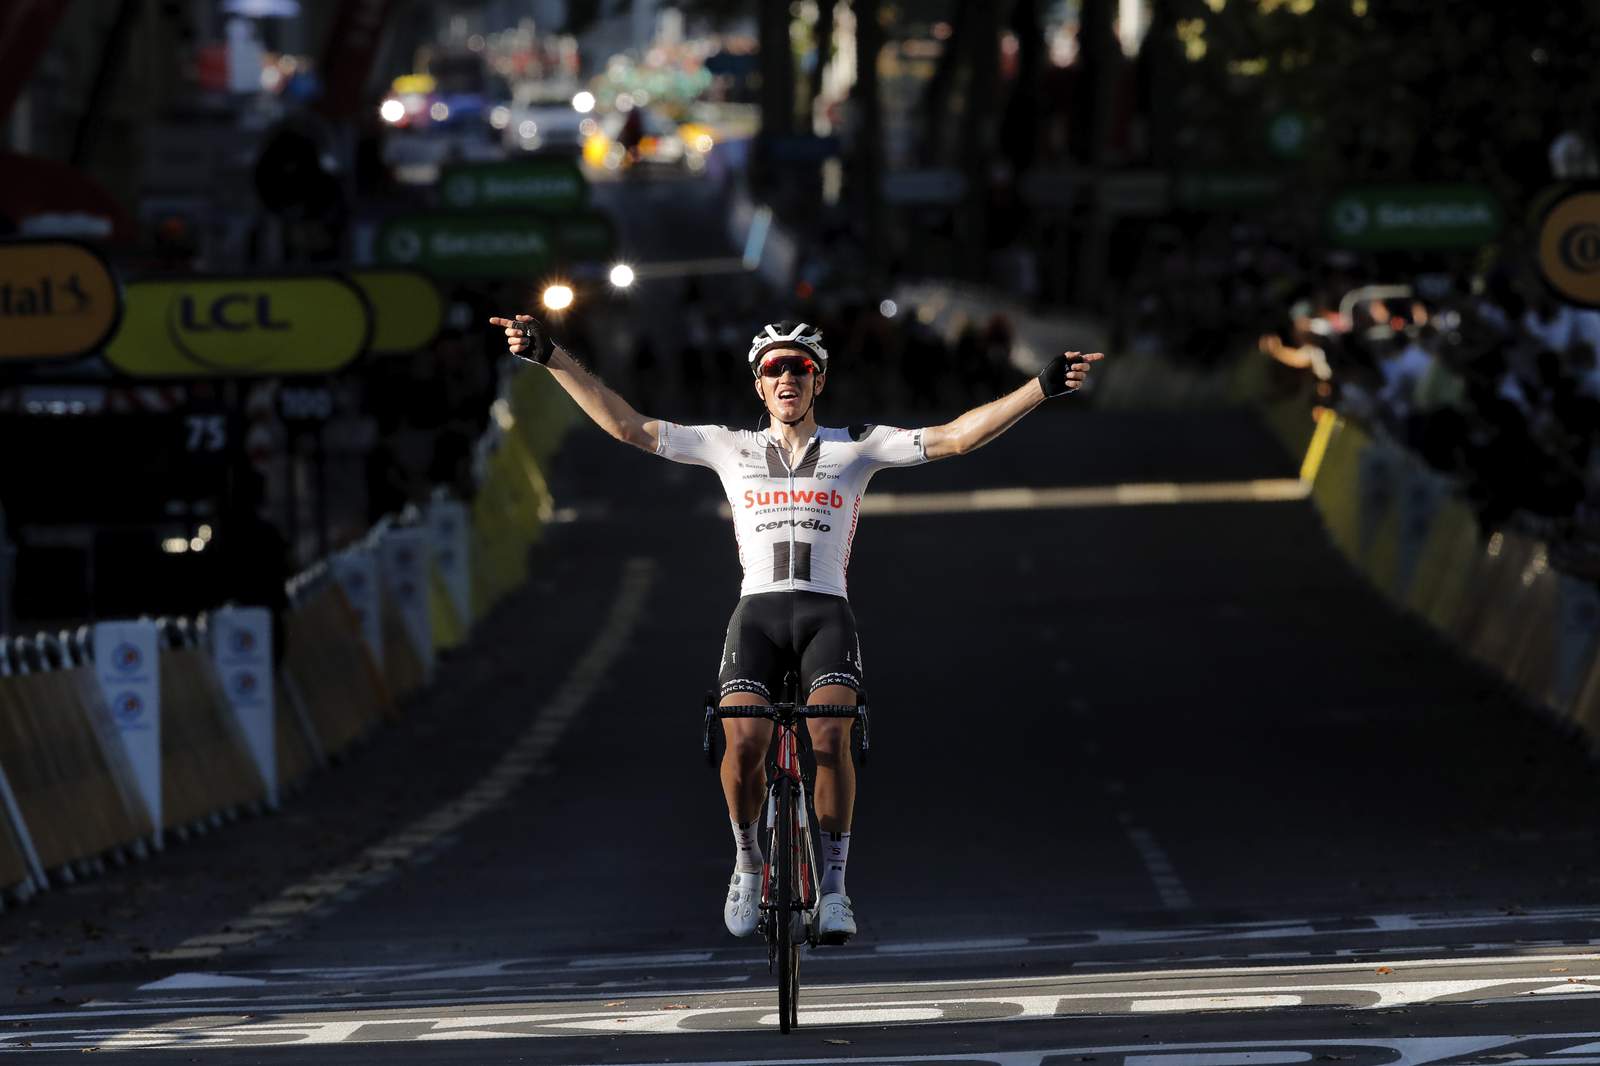 Andersen wins Stage 14 at Tour de France led by Roglic